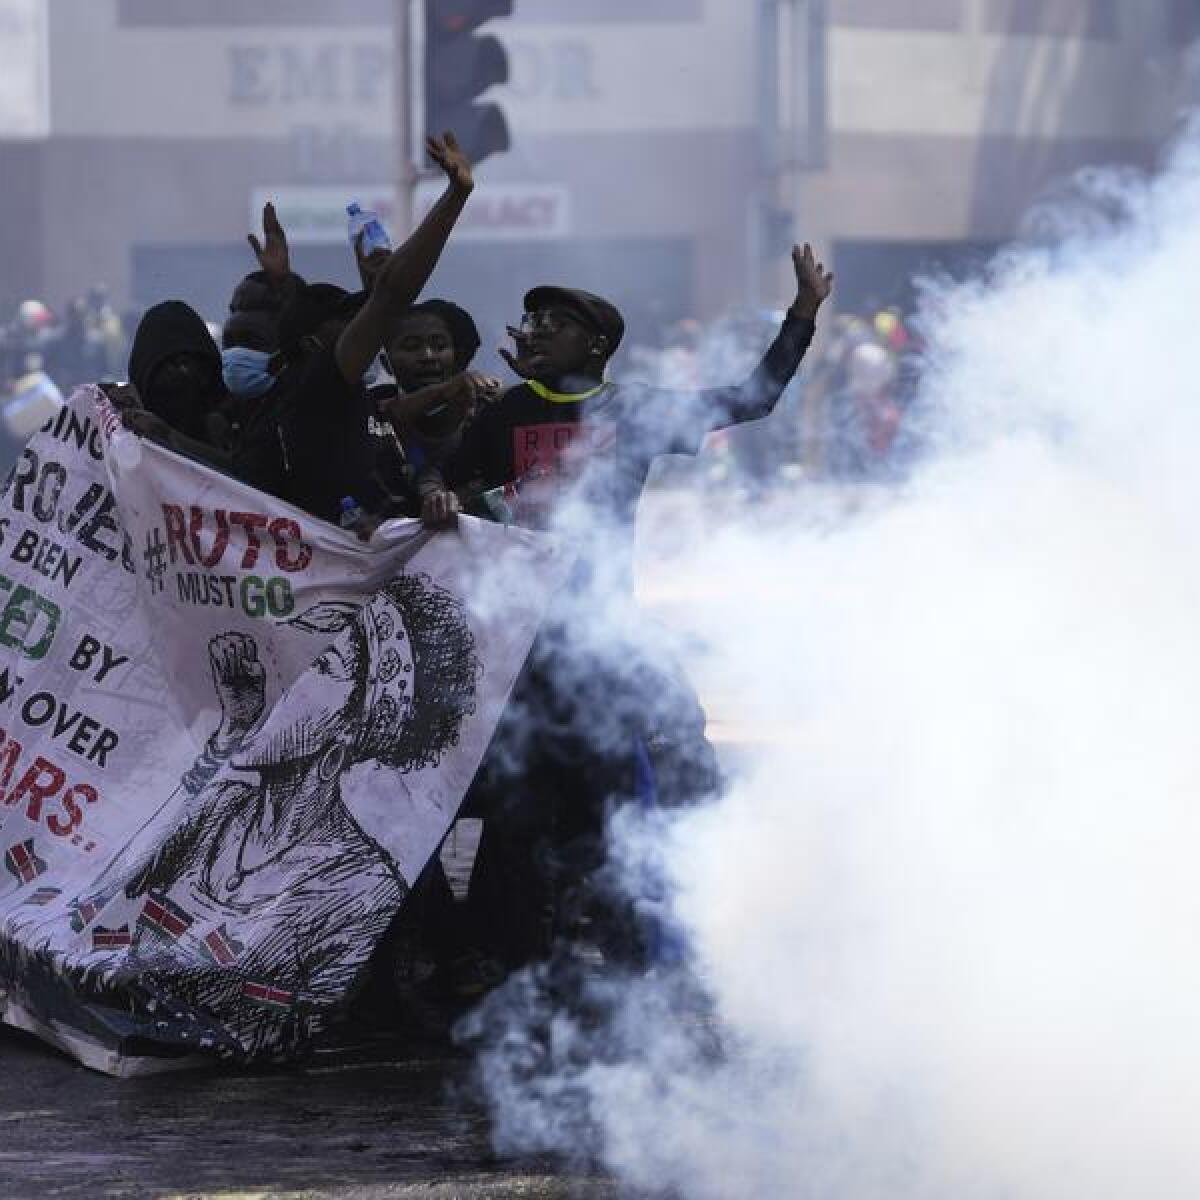 Protesters hide behind a banner as police fire tear gas in Nairobi